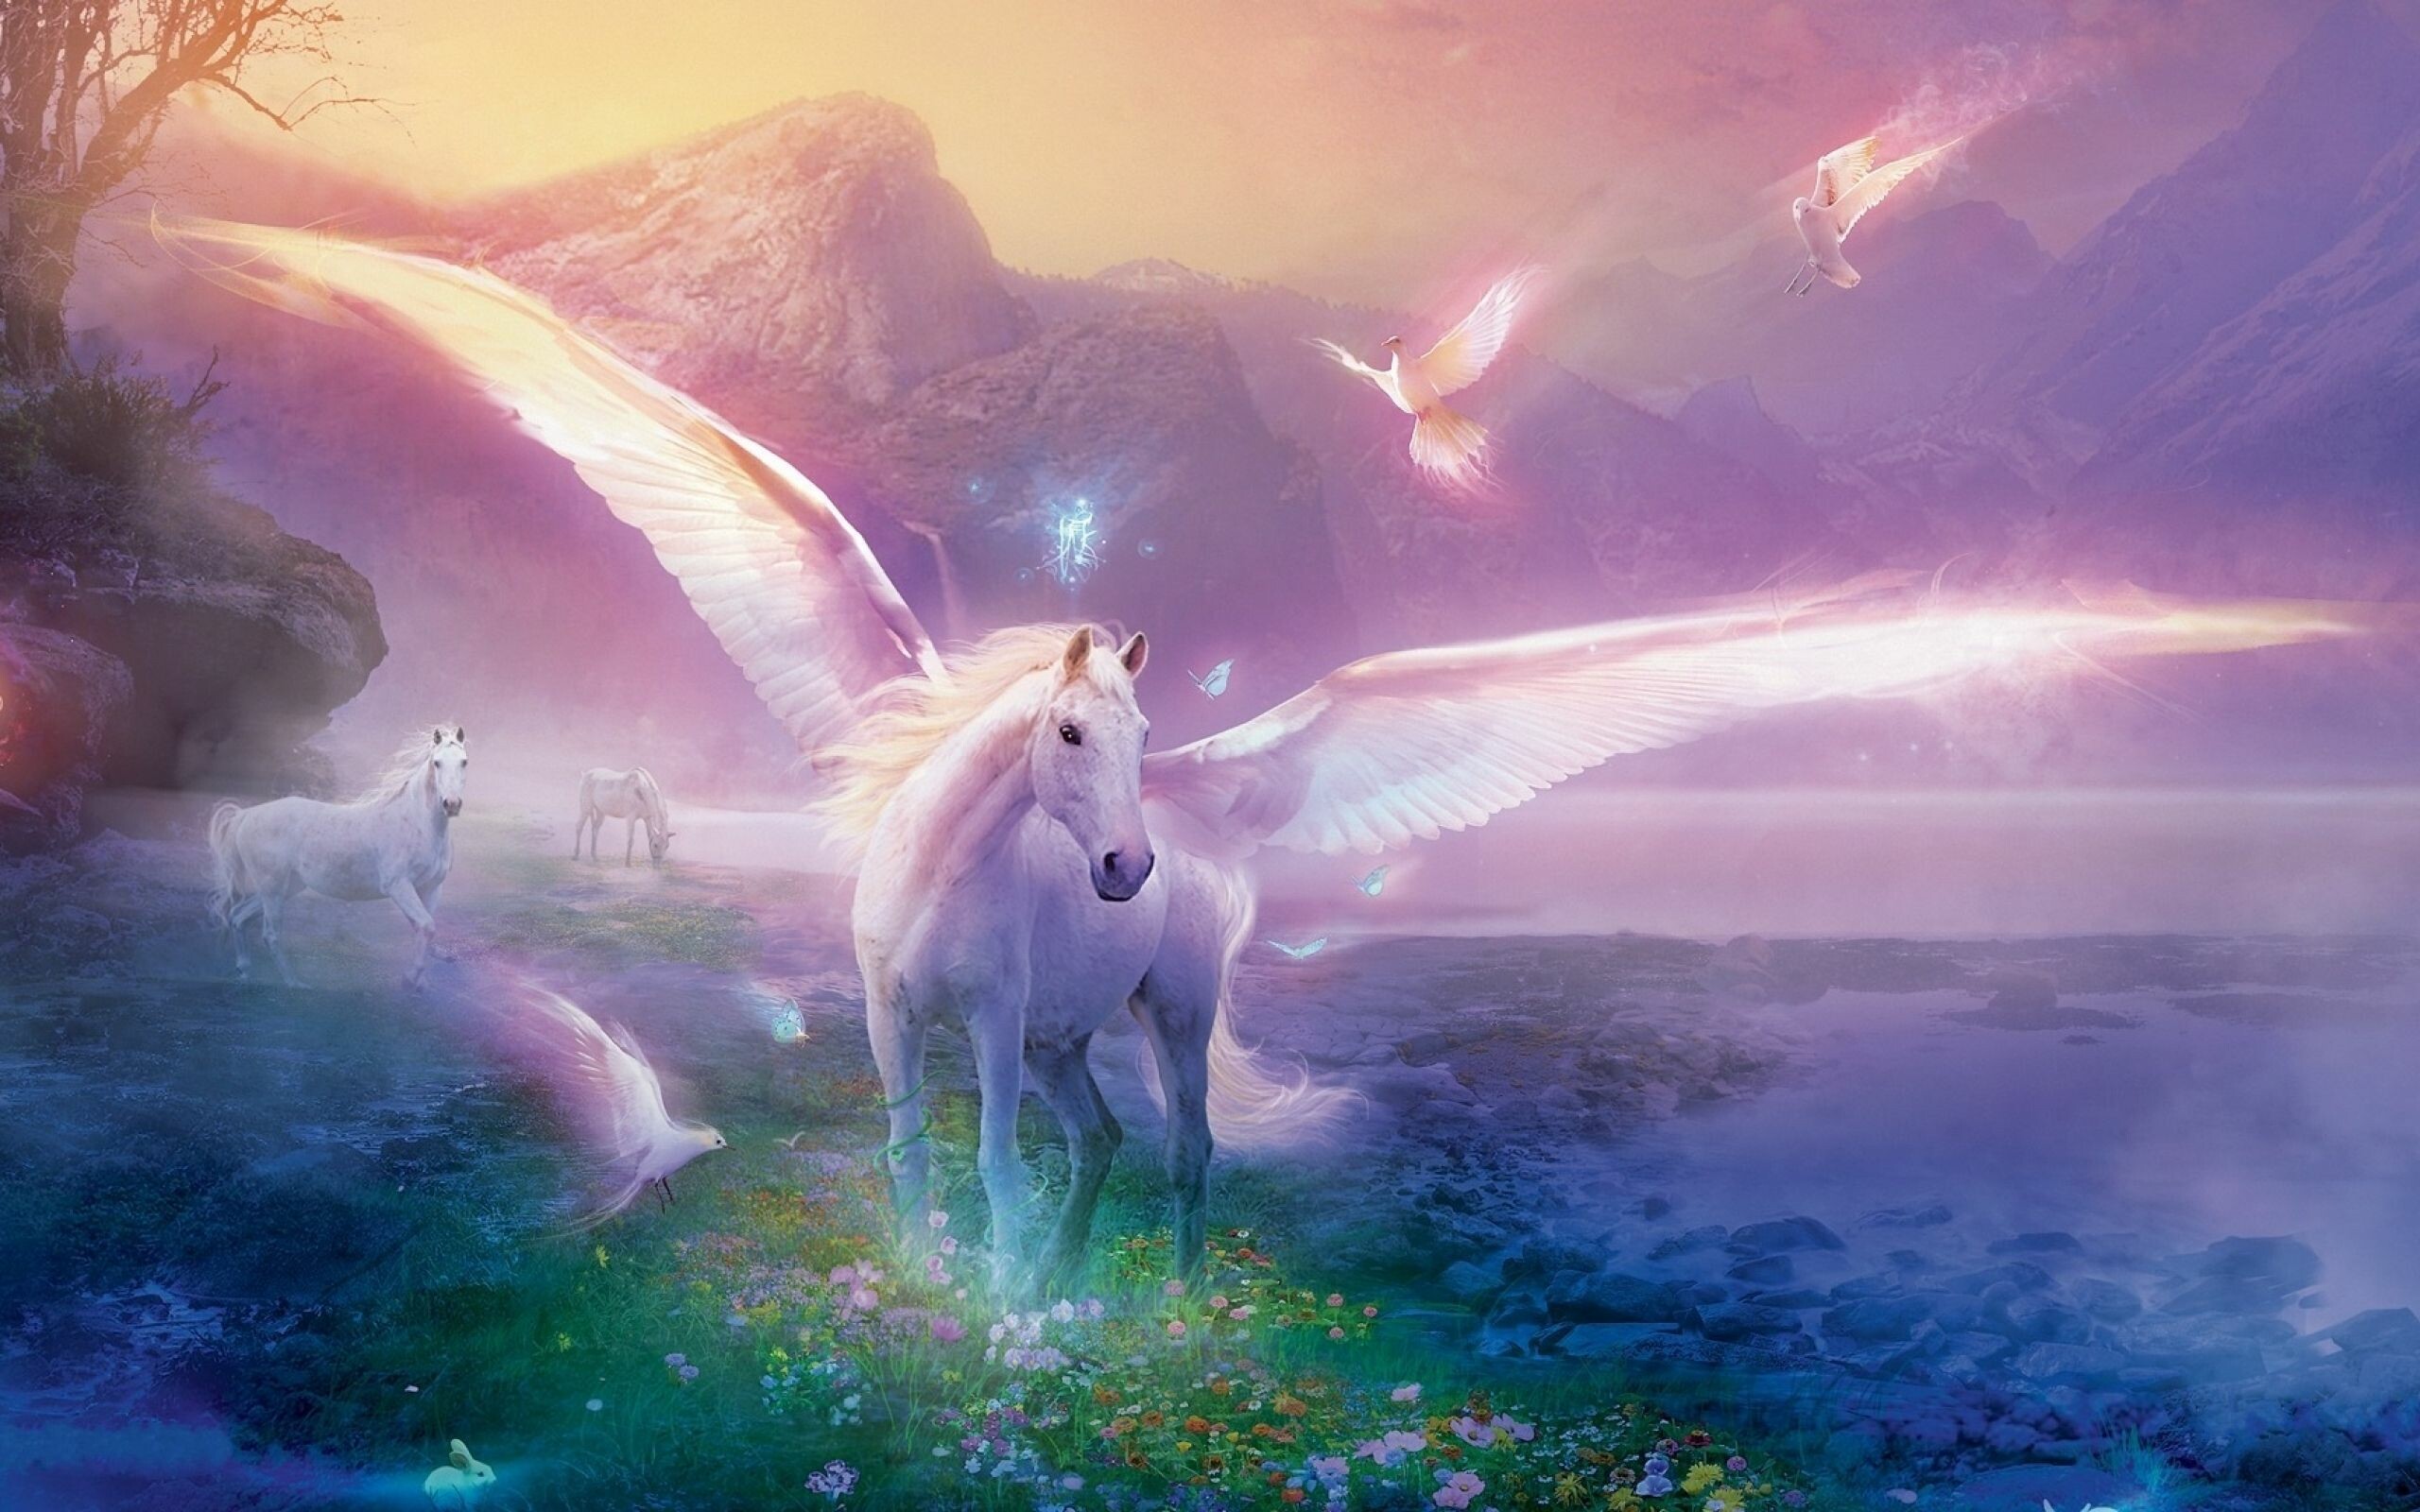 Real Unicorn Wallpaper: HD, 4K, 5K for PC and Mobile. Download free image for iPhone, Android